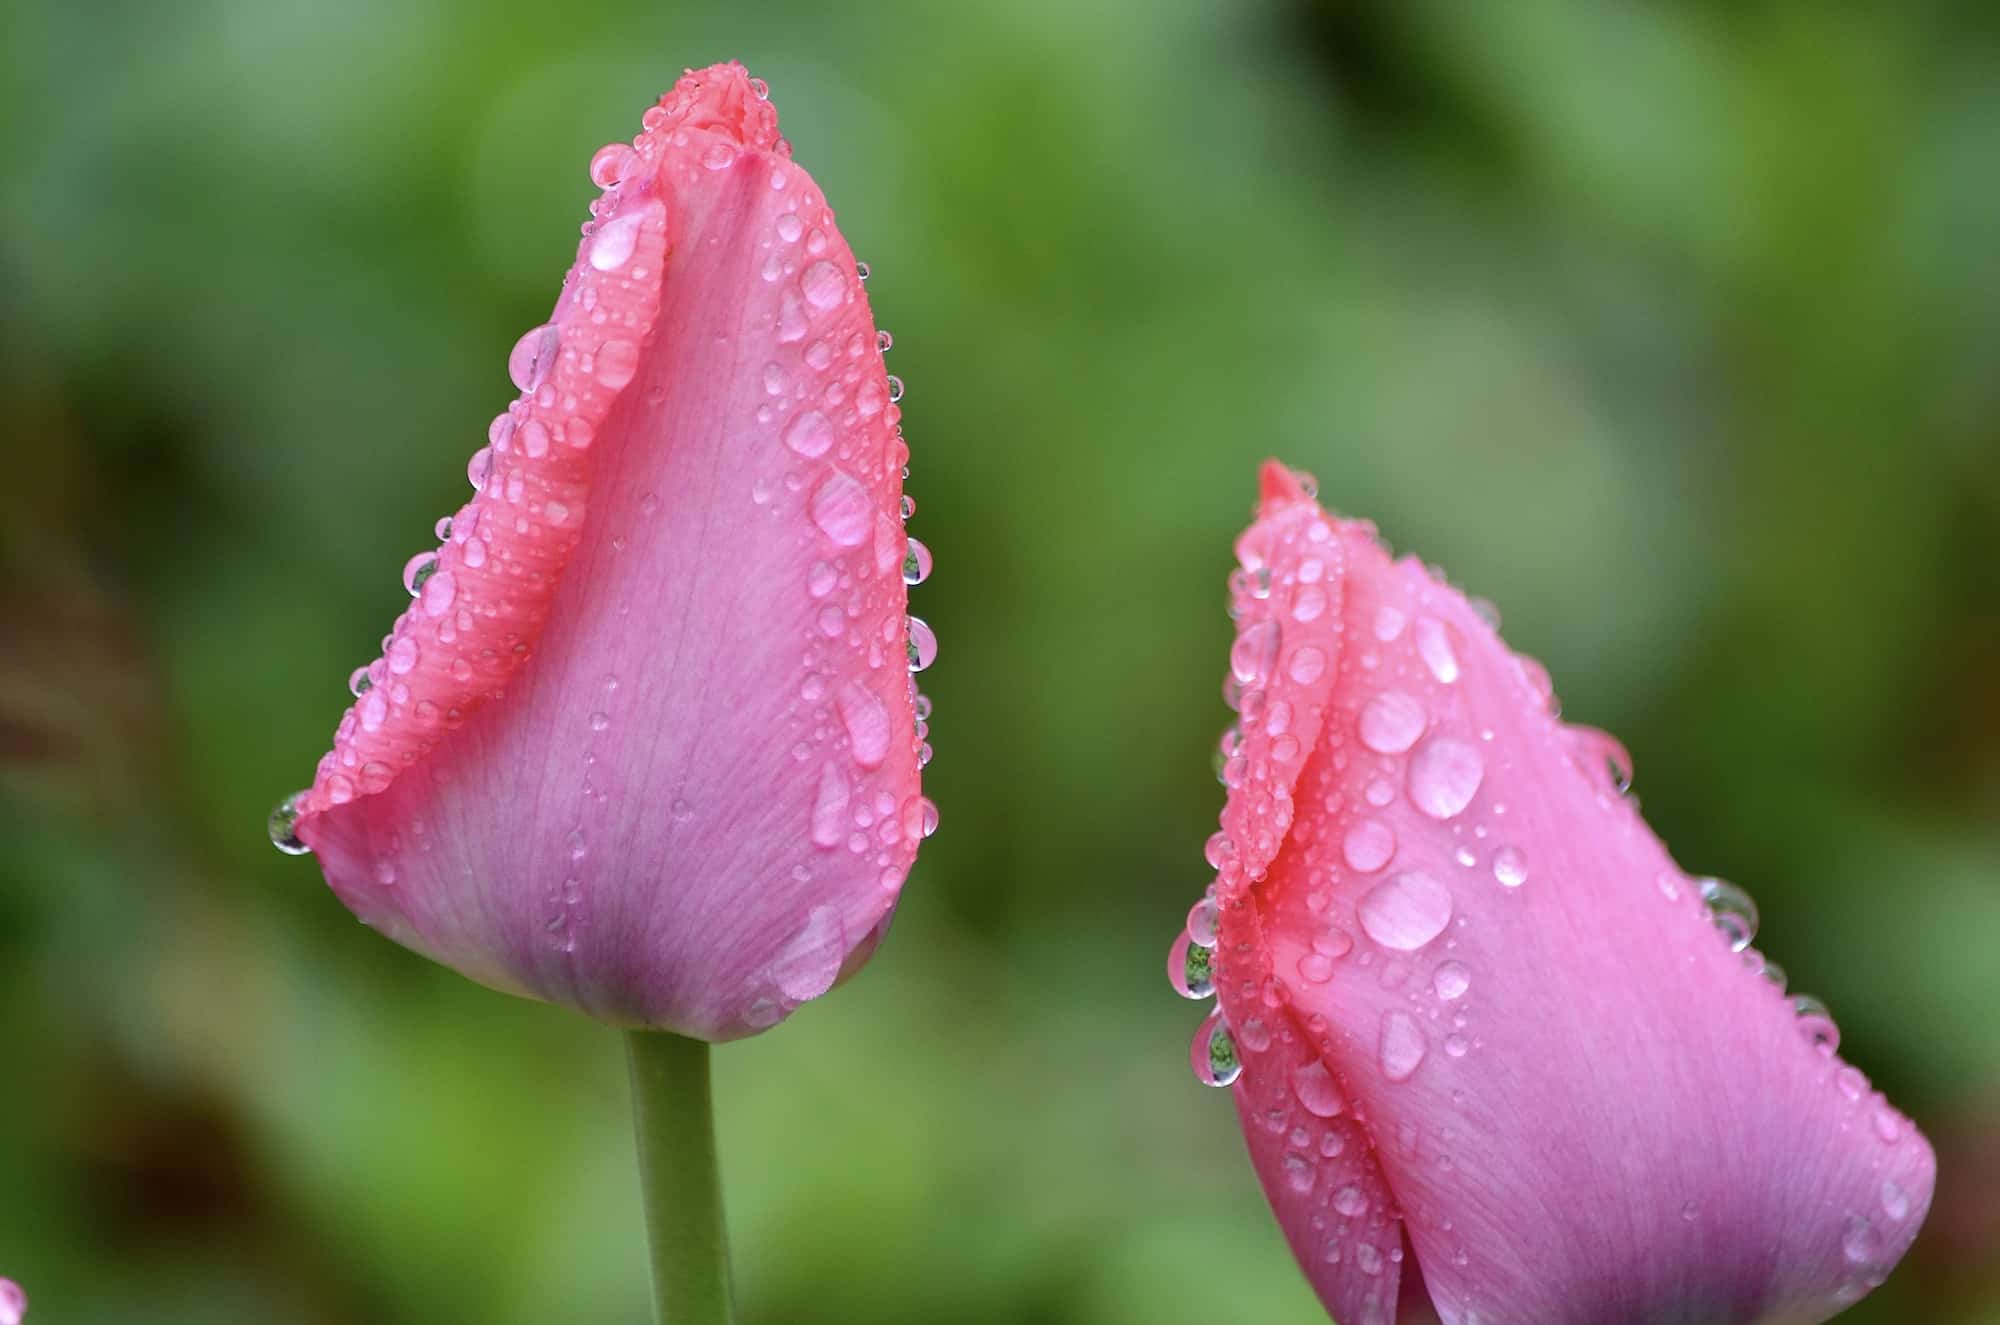 Two pink tulips with droplets of water on them.